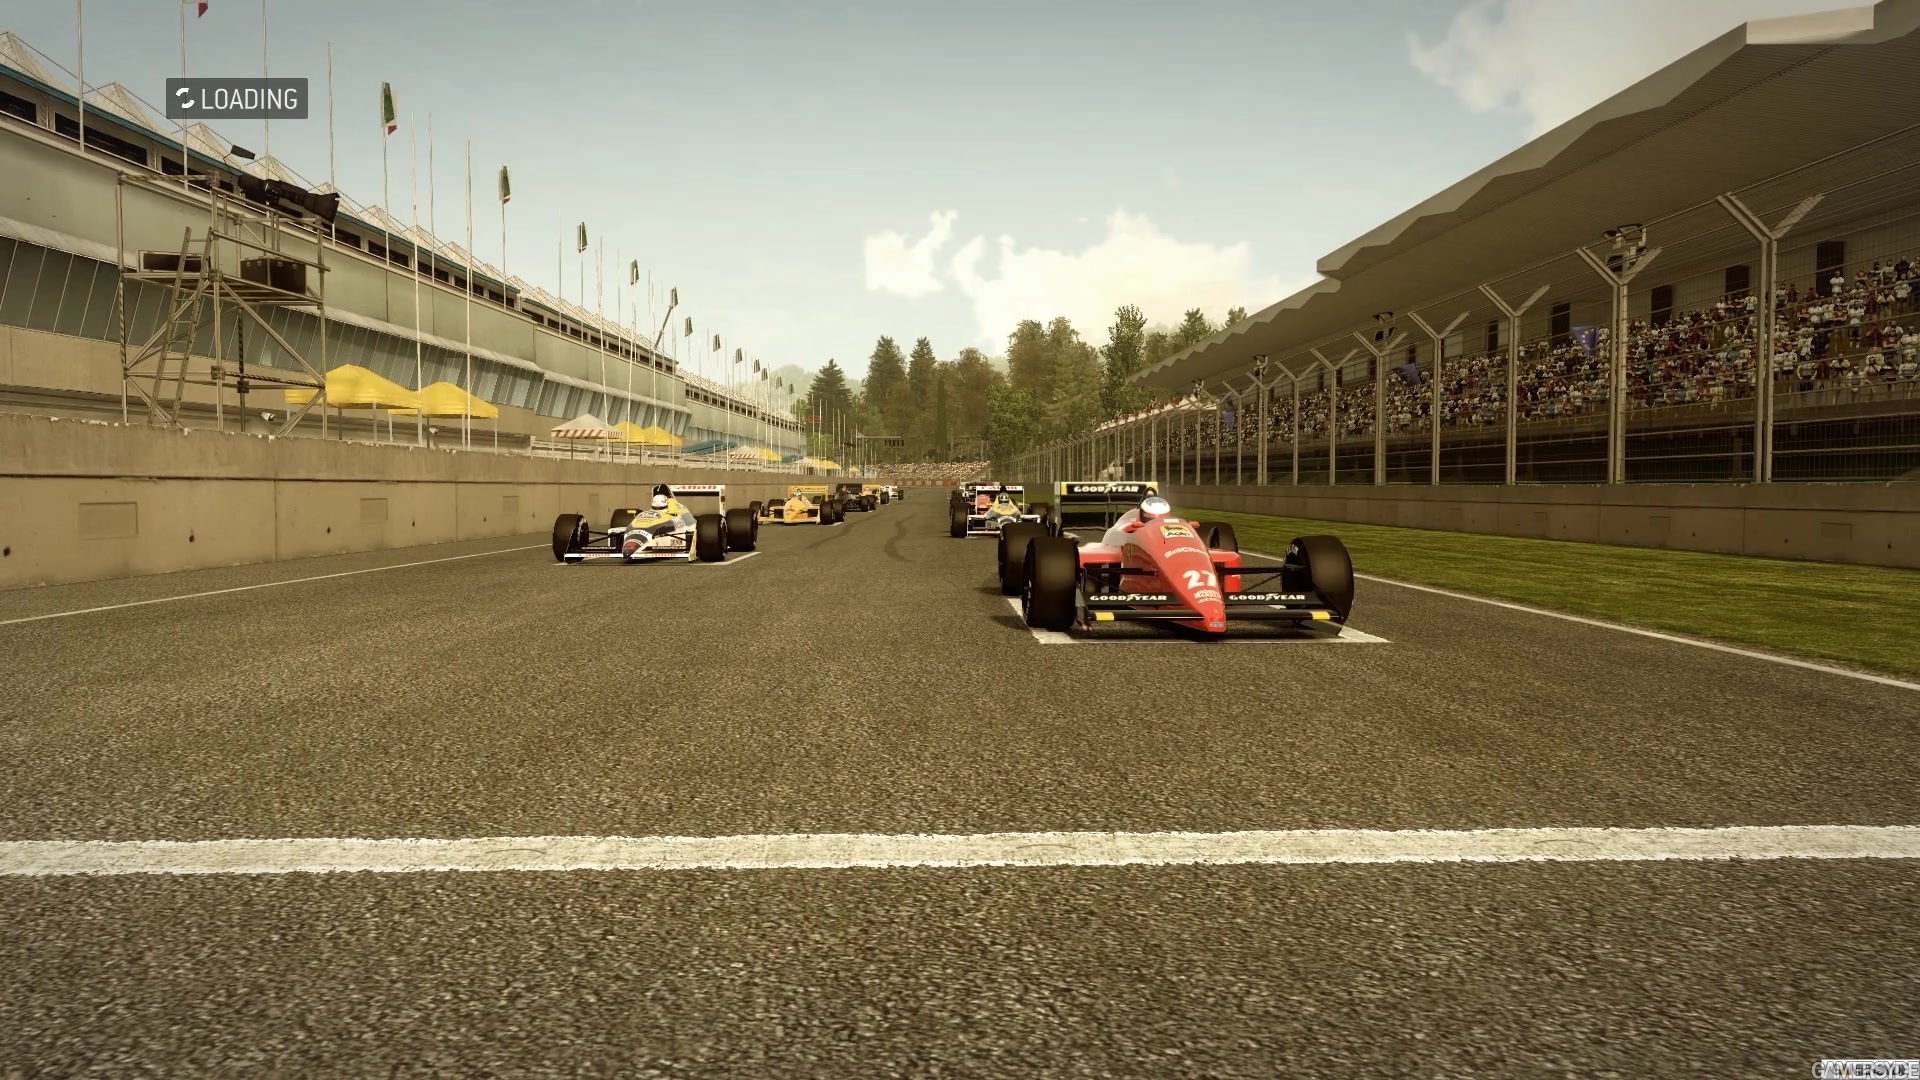 F1 2013 - Classic Imola - Race - High quality stream and download